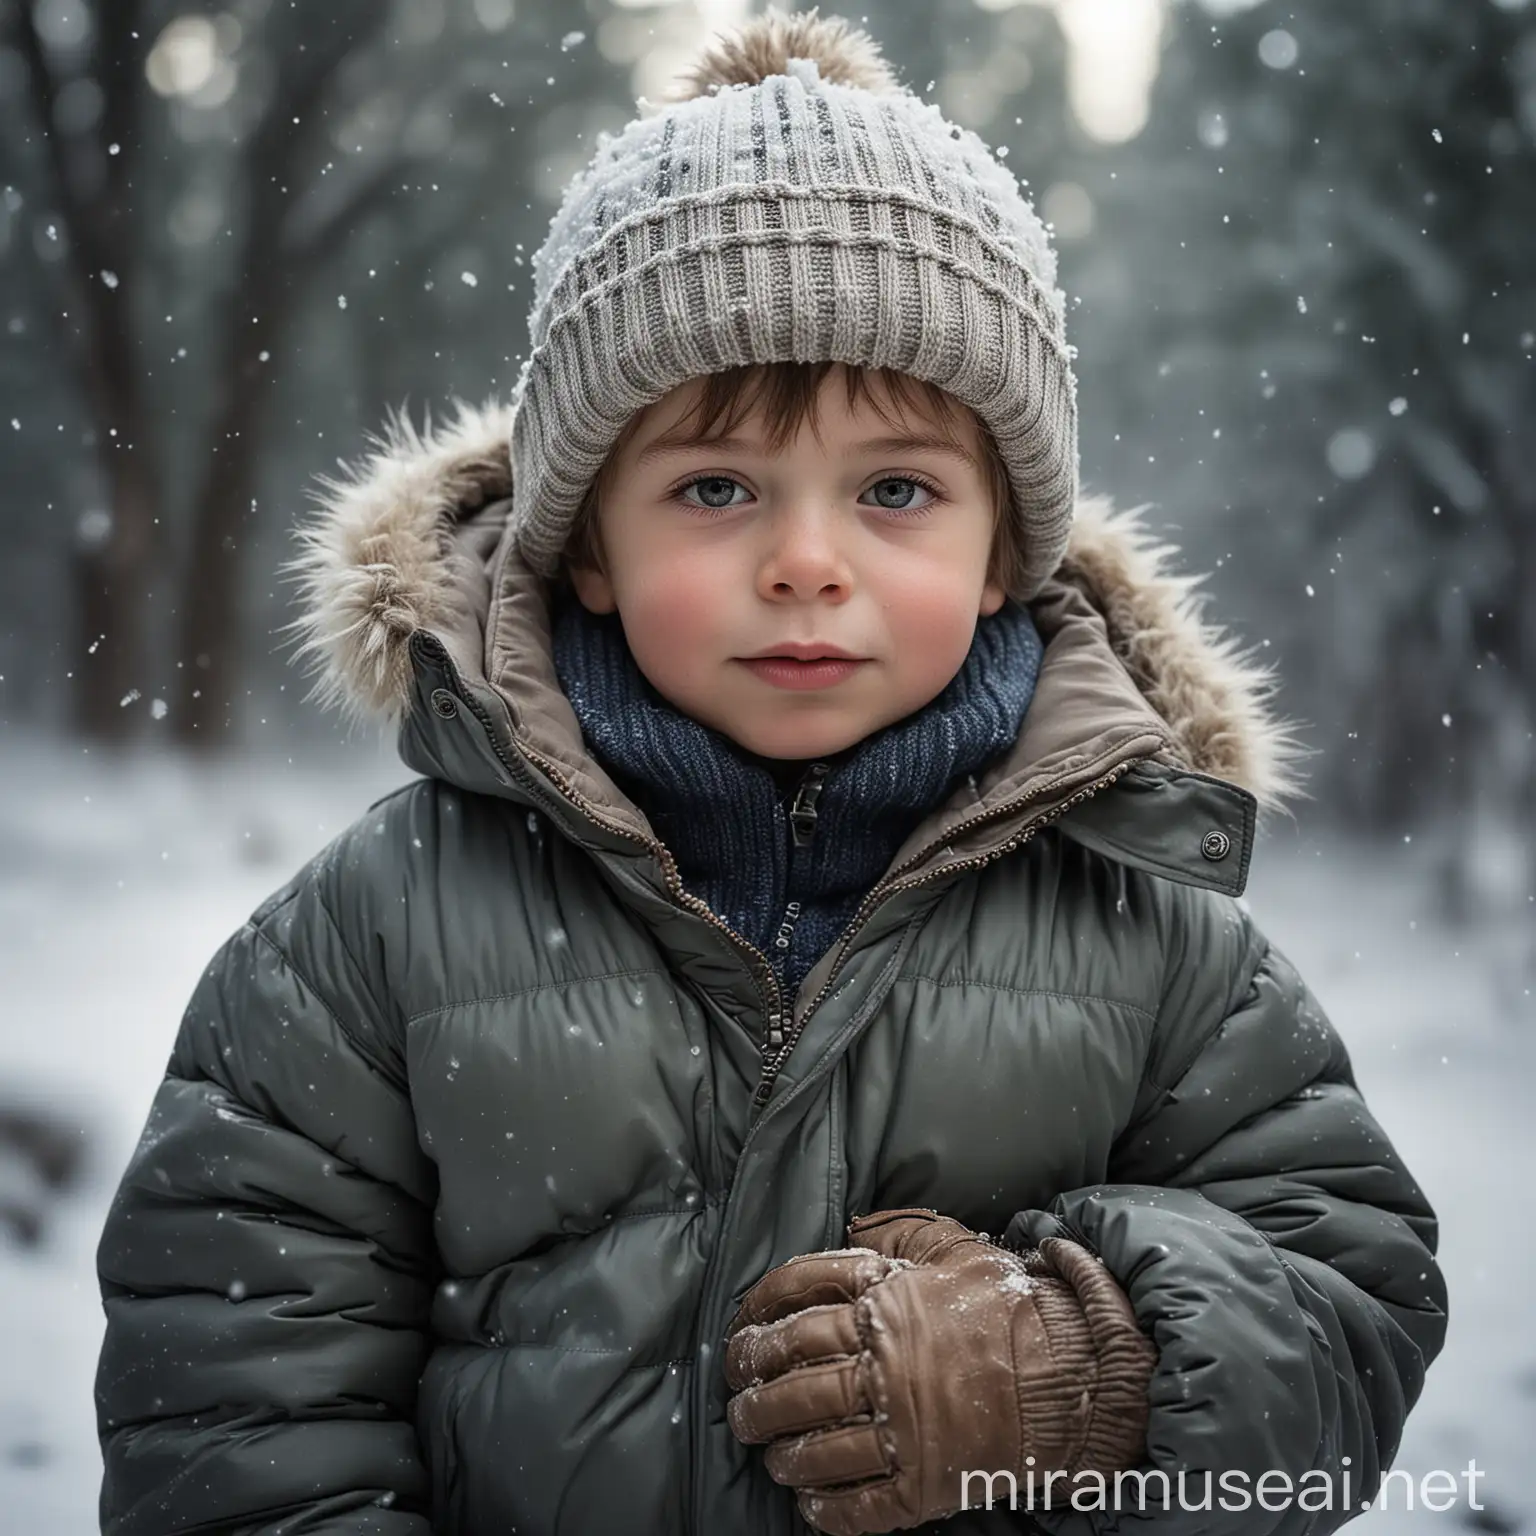 A highly realistic photograph of a 6-year-old boy wrapped up in a thick puffer jacket, a warm hat, and large winter boots, as if he’s in the midst of a freezing winter. The boy is in the foreground, giving a clear and detailed view of his bundled-up attire against a blurred snowy background. The lighting captures the frosty atmosphere and the child's breath is visible in the cold air.